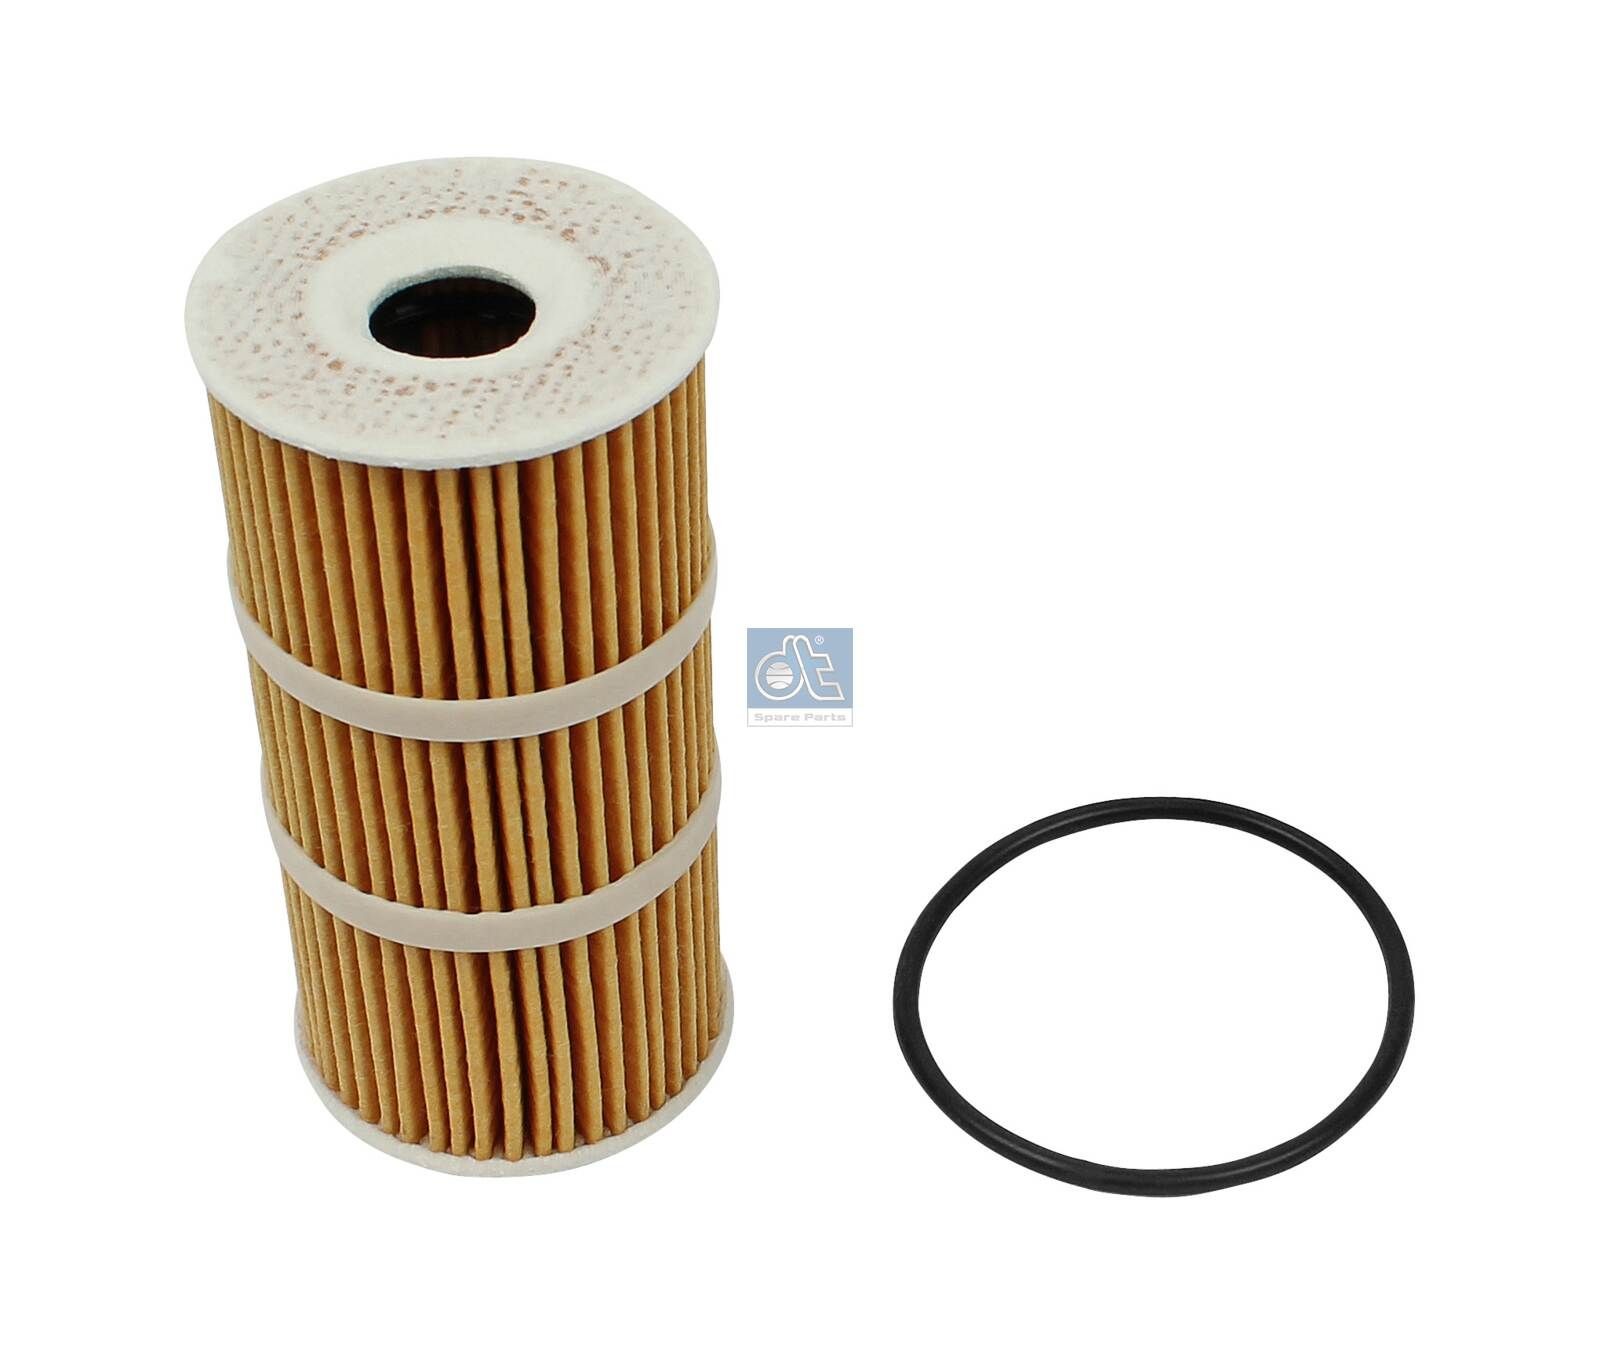 6.24223 DT Spare Parts Oil filters RENAULT with seal, Filter Insert